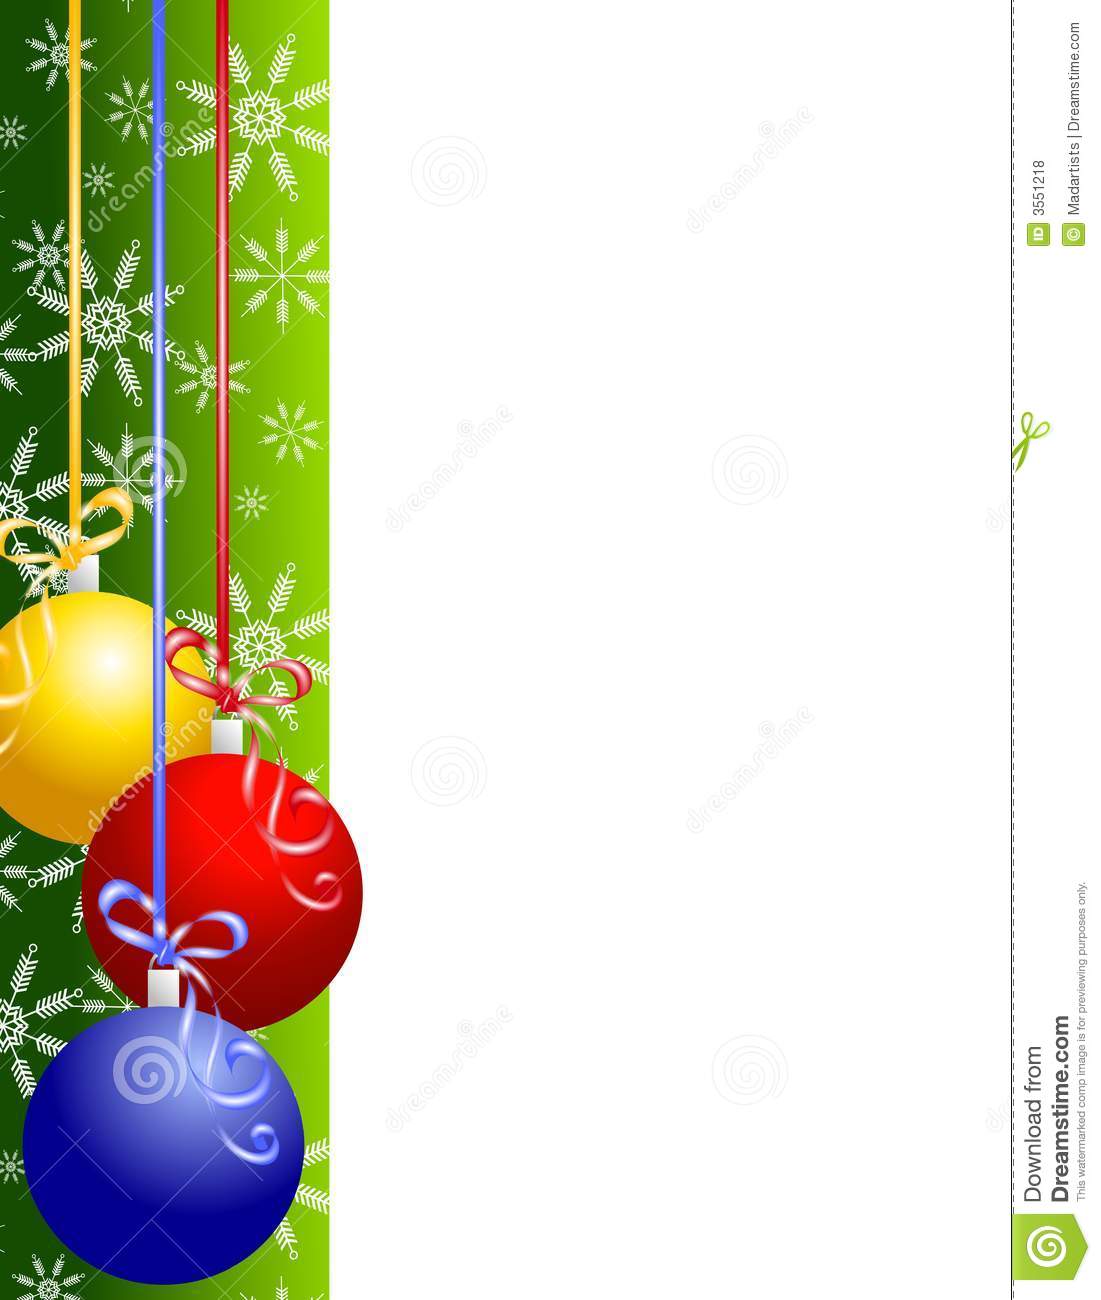 Christma Border For Microsoft Word Clipart - Clipart Suggest With Regard To Christmas Border Word Template